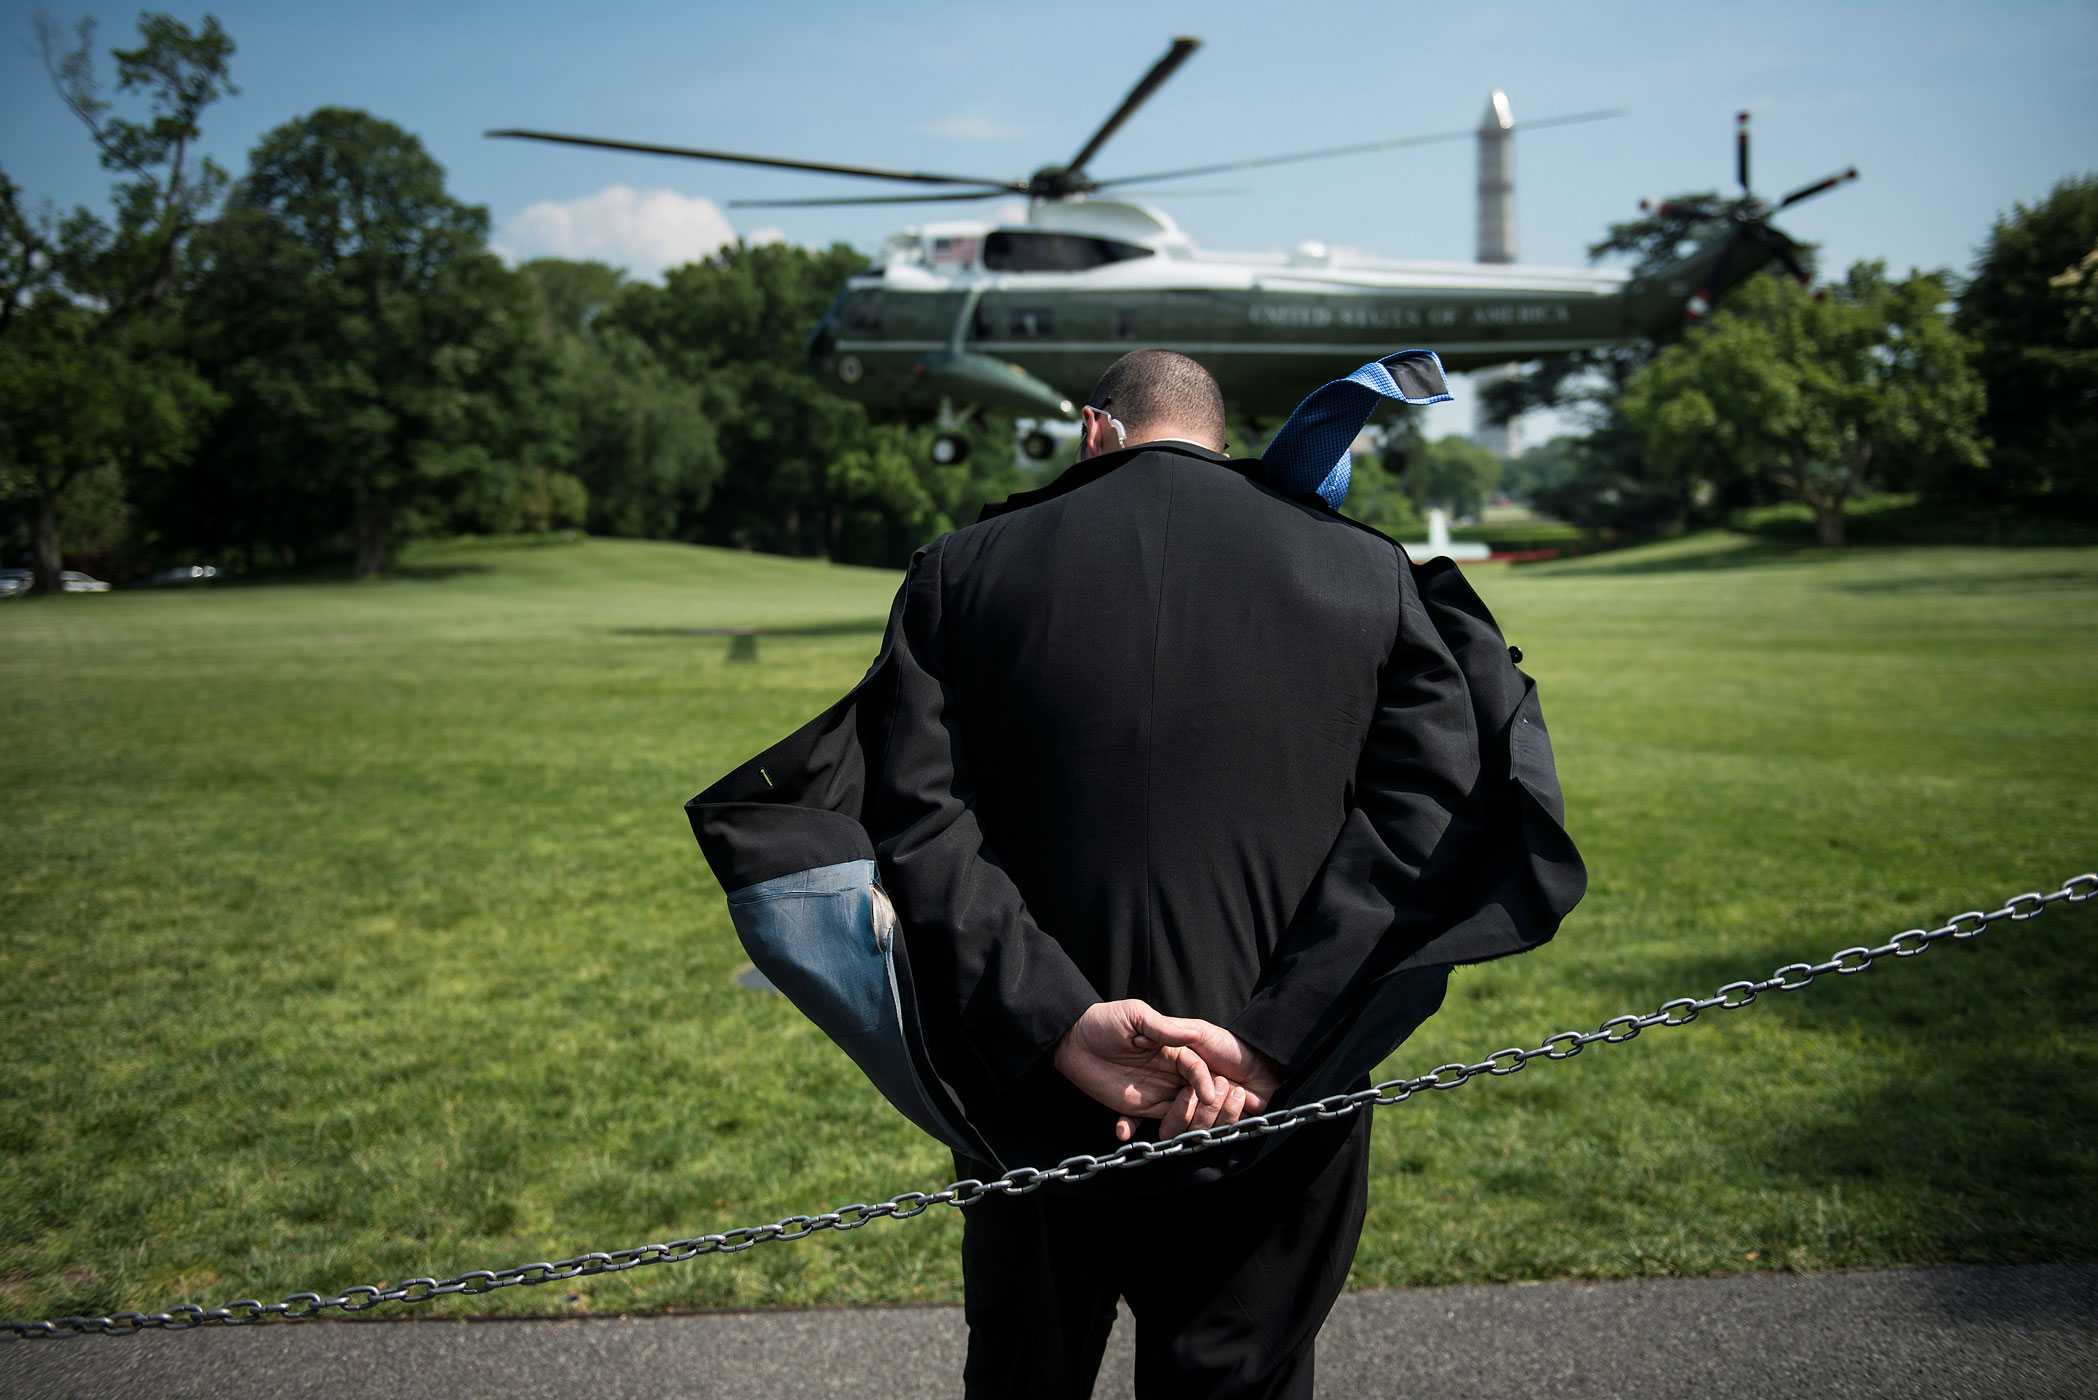 May 29, 2013. A Secret Service agent ducks rotor wash as Marine One lands to pick up President Barack Obama on the South Lawn of the White House in Washington.